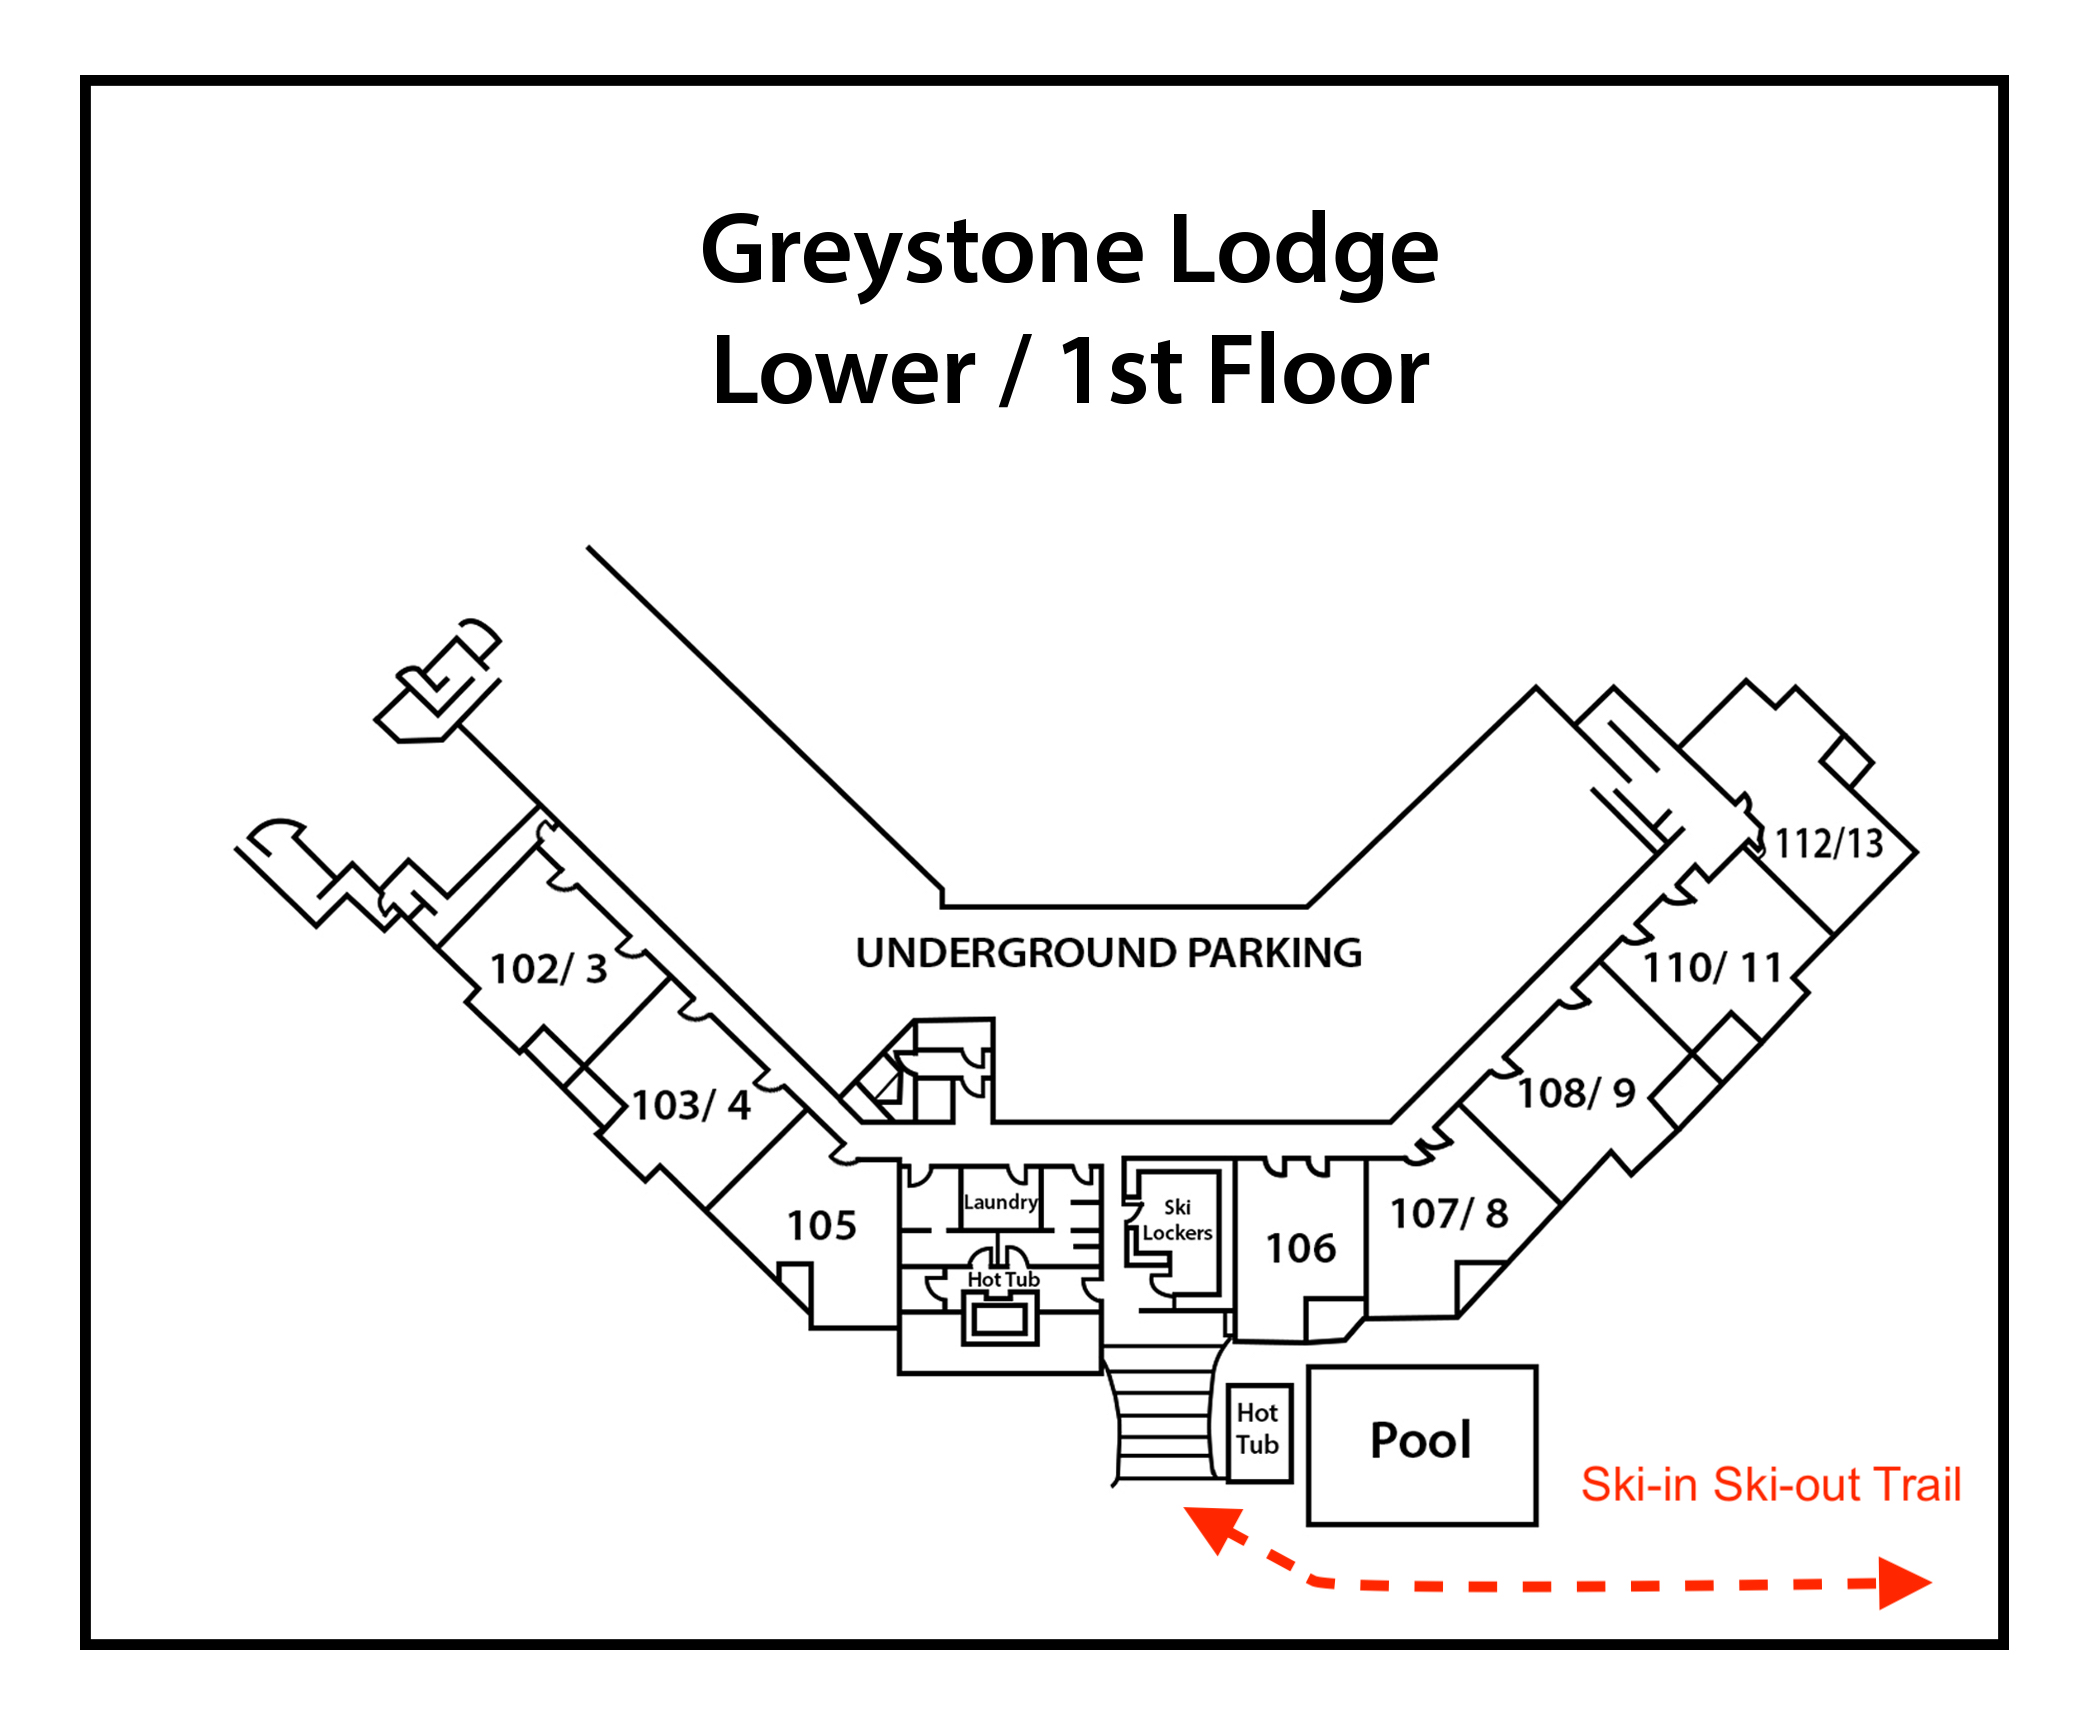 Greystone-Lodge SKI IN TRAIL MARKED IN RED 1st-Floor-(numbers-only)